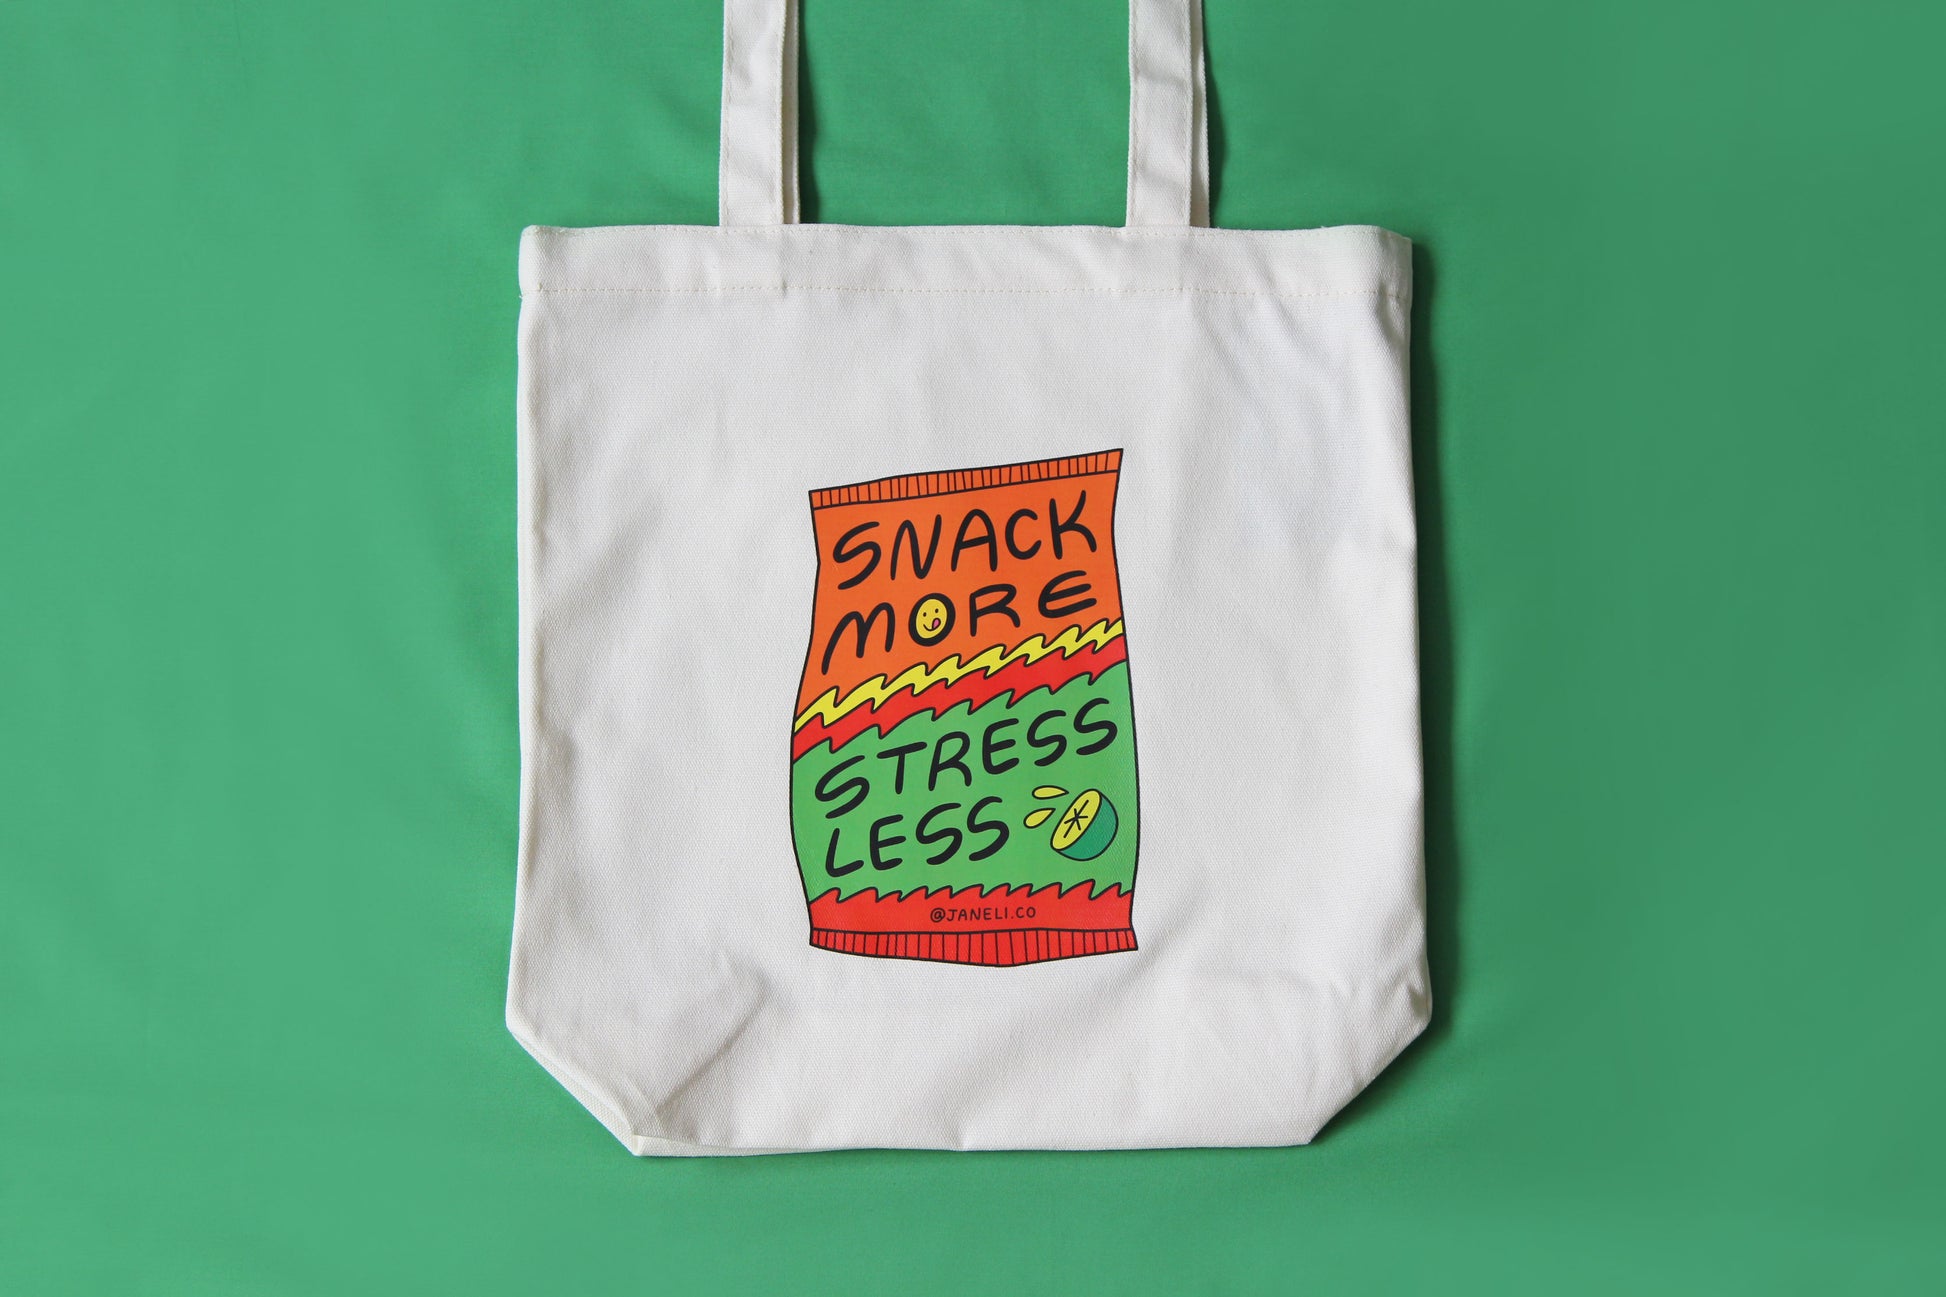 A photo of close up of a natural canvas tote with a chip bag that says "Snack More Stress Less" on it over a green background.